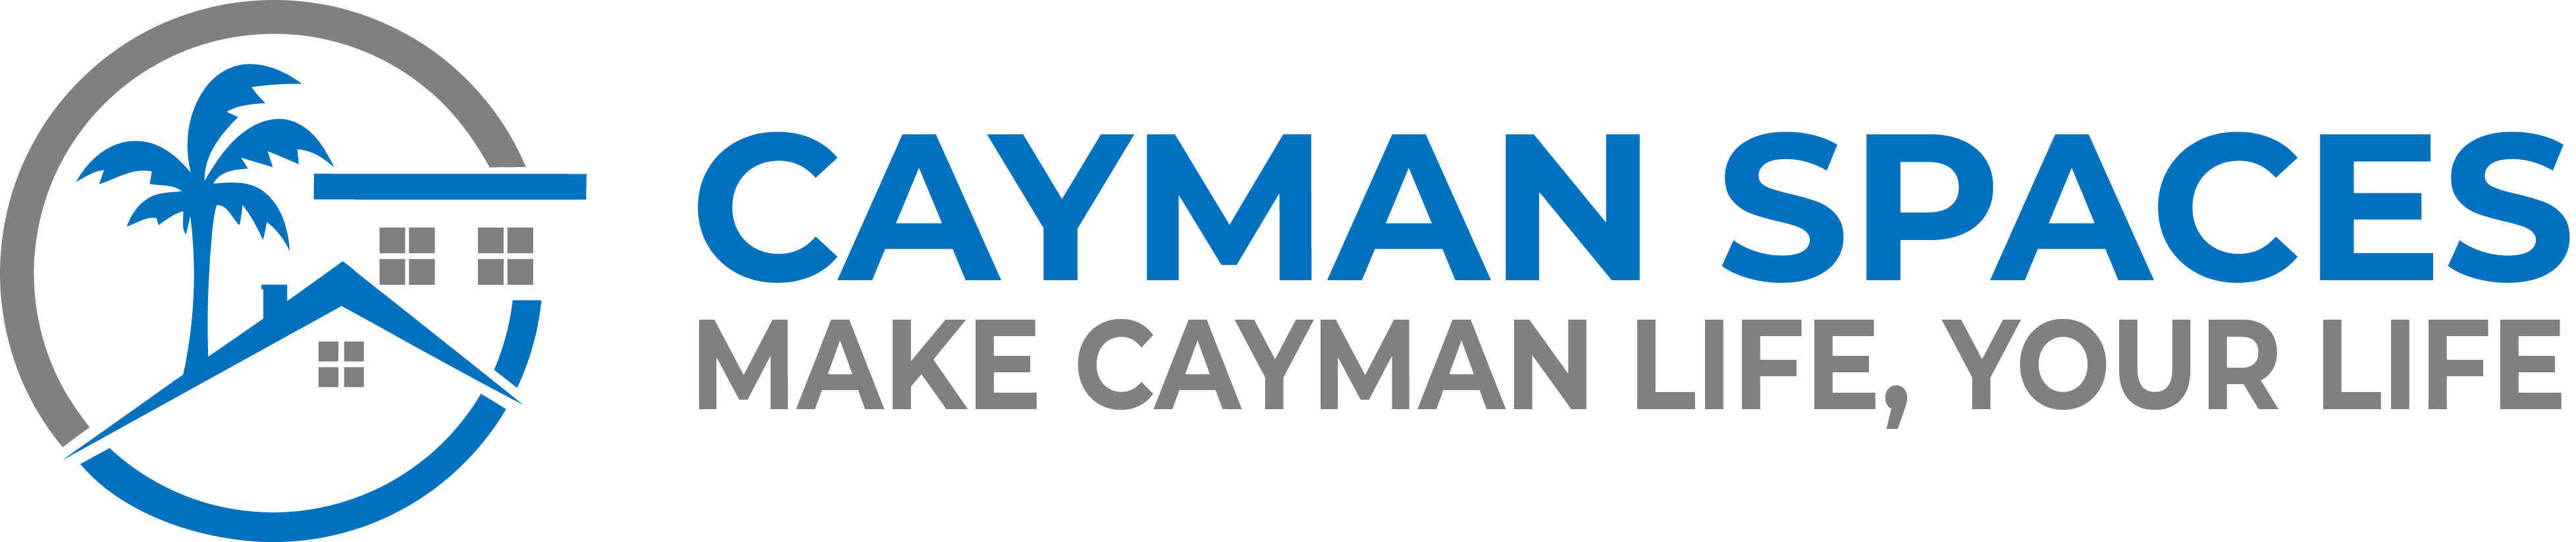 Cayman Spaces Multi-Media Production